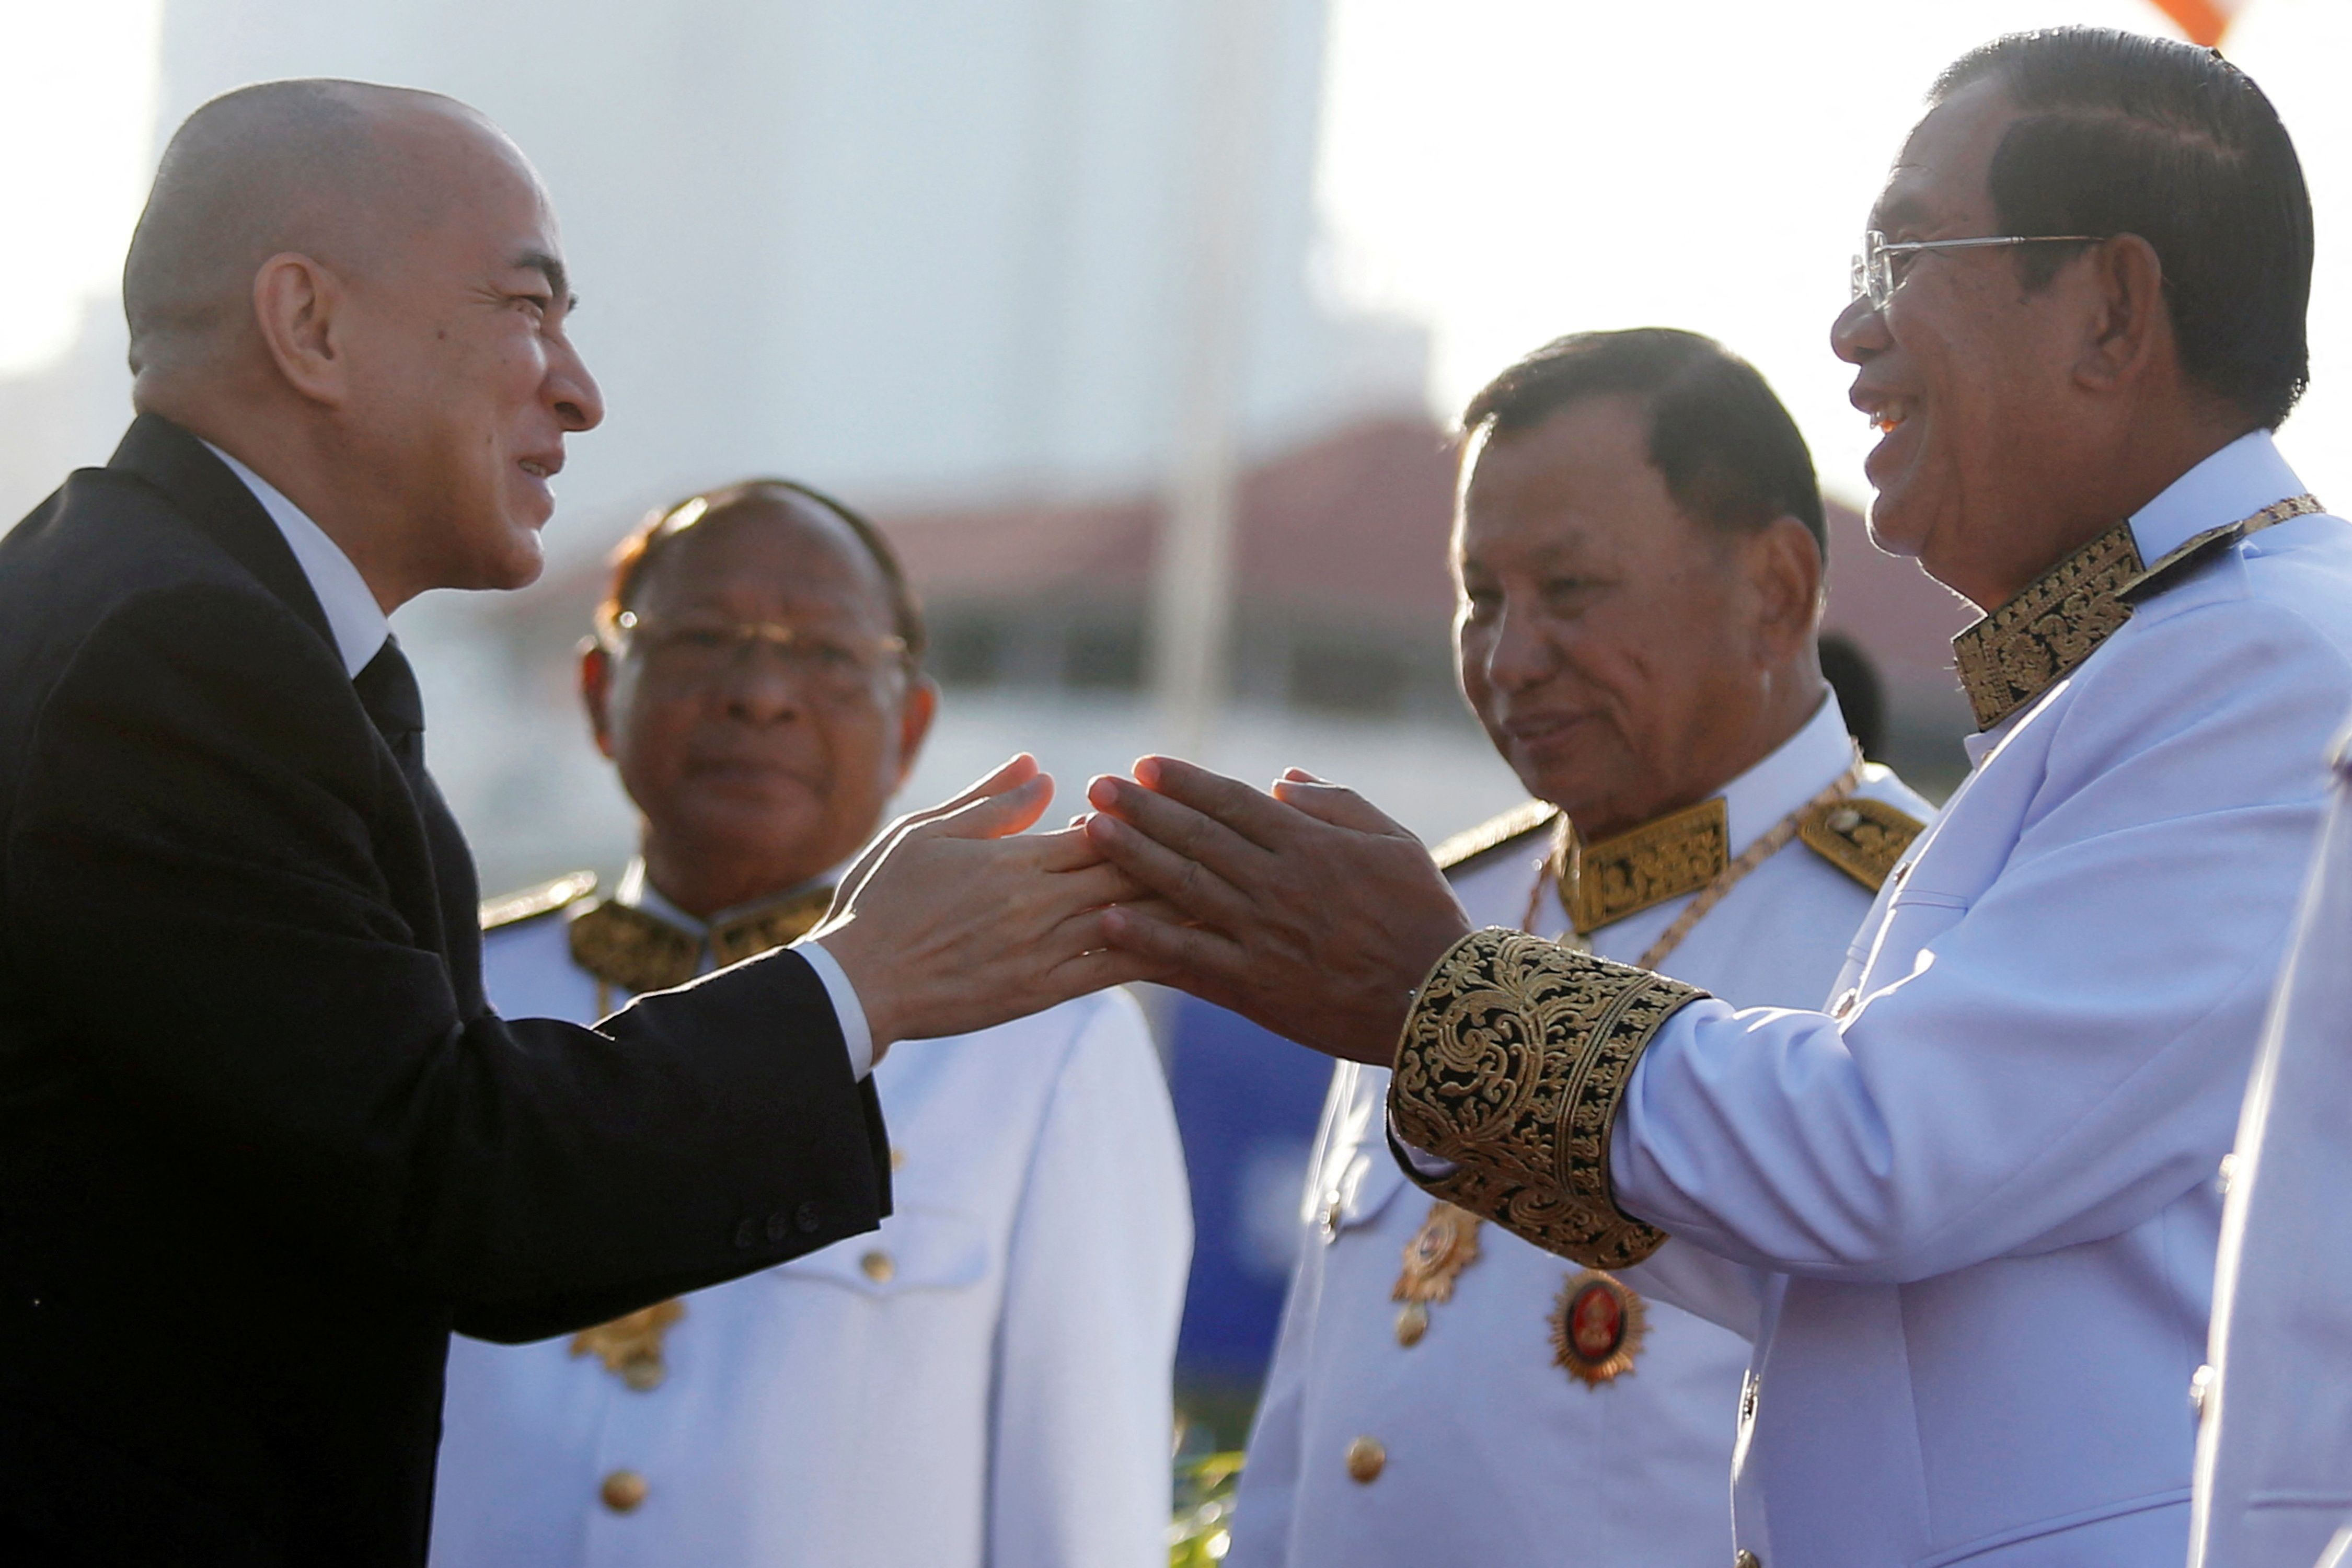 Cambodia's King Norodom Sihamoni greets PM Hun Sen while attending celebrations marking the 65th anniversary of the country's independence in Phnom Penh